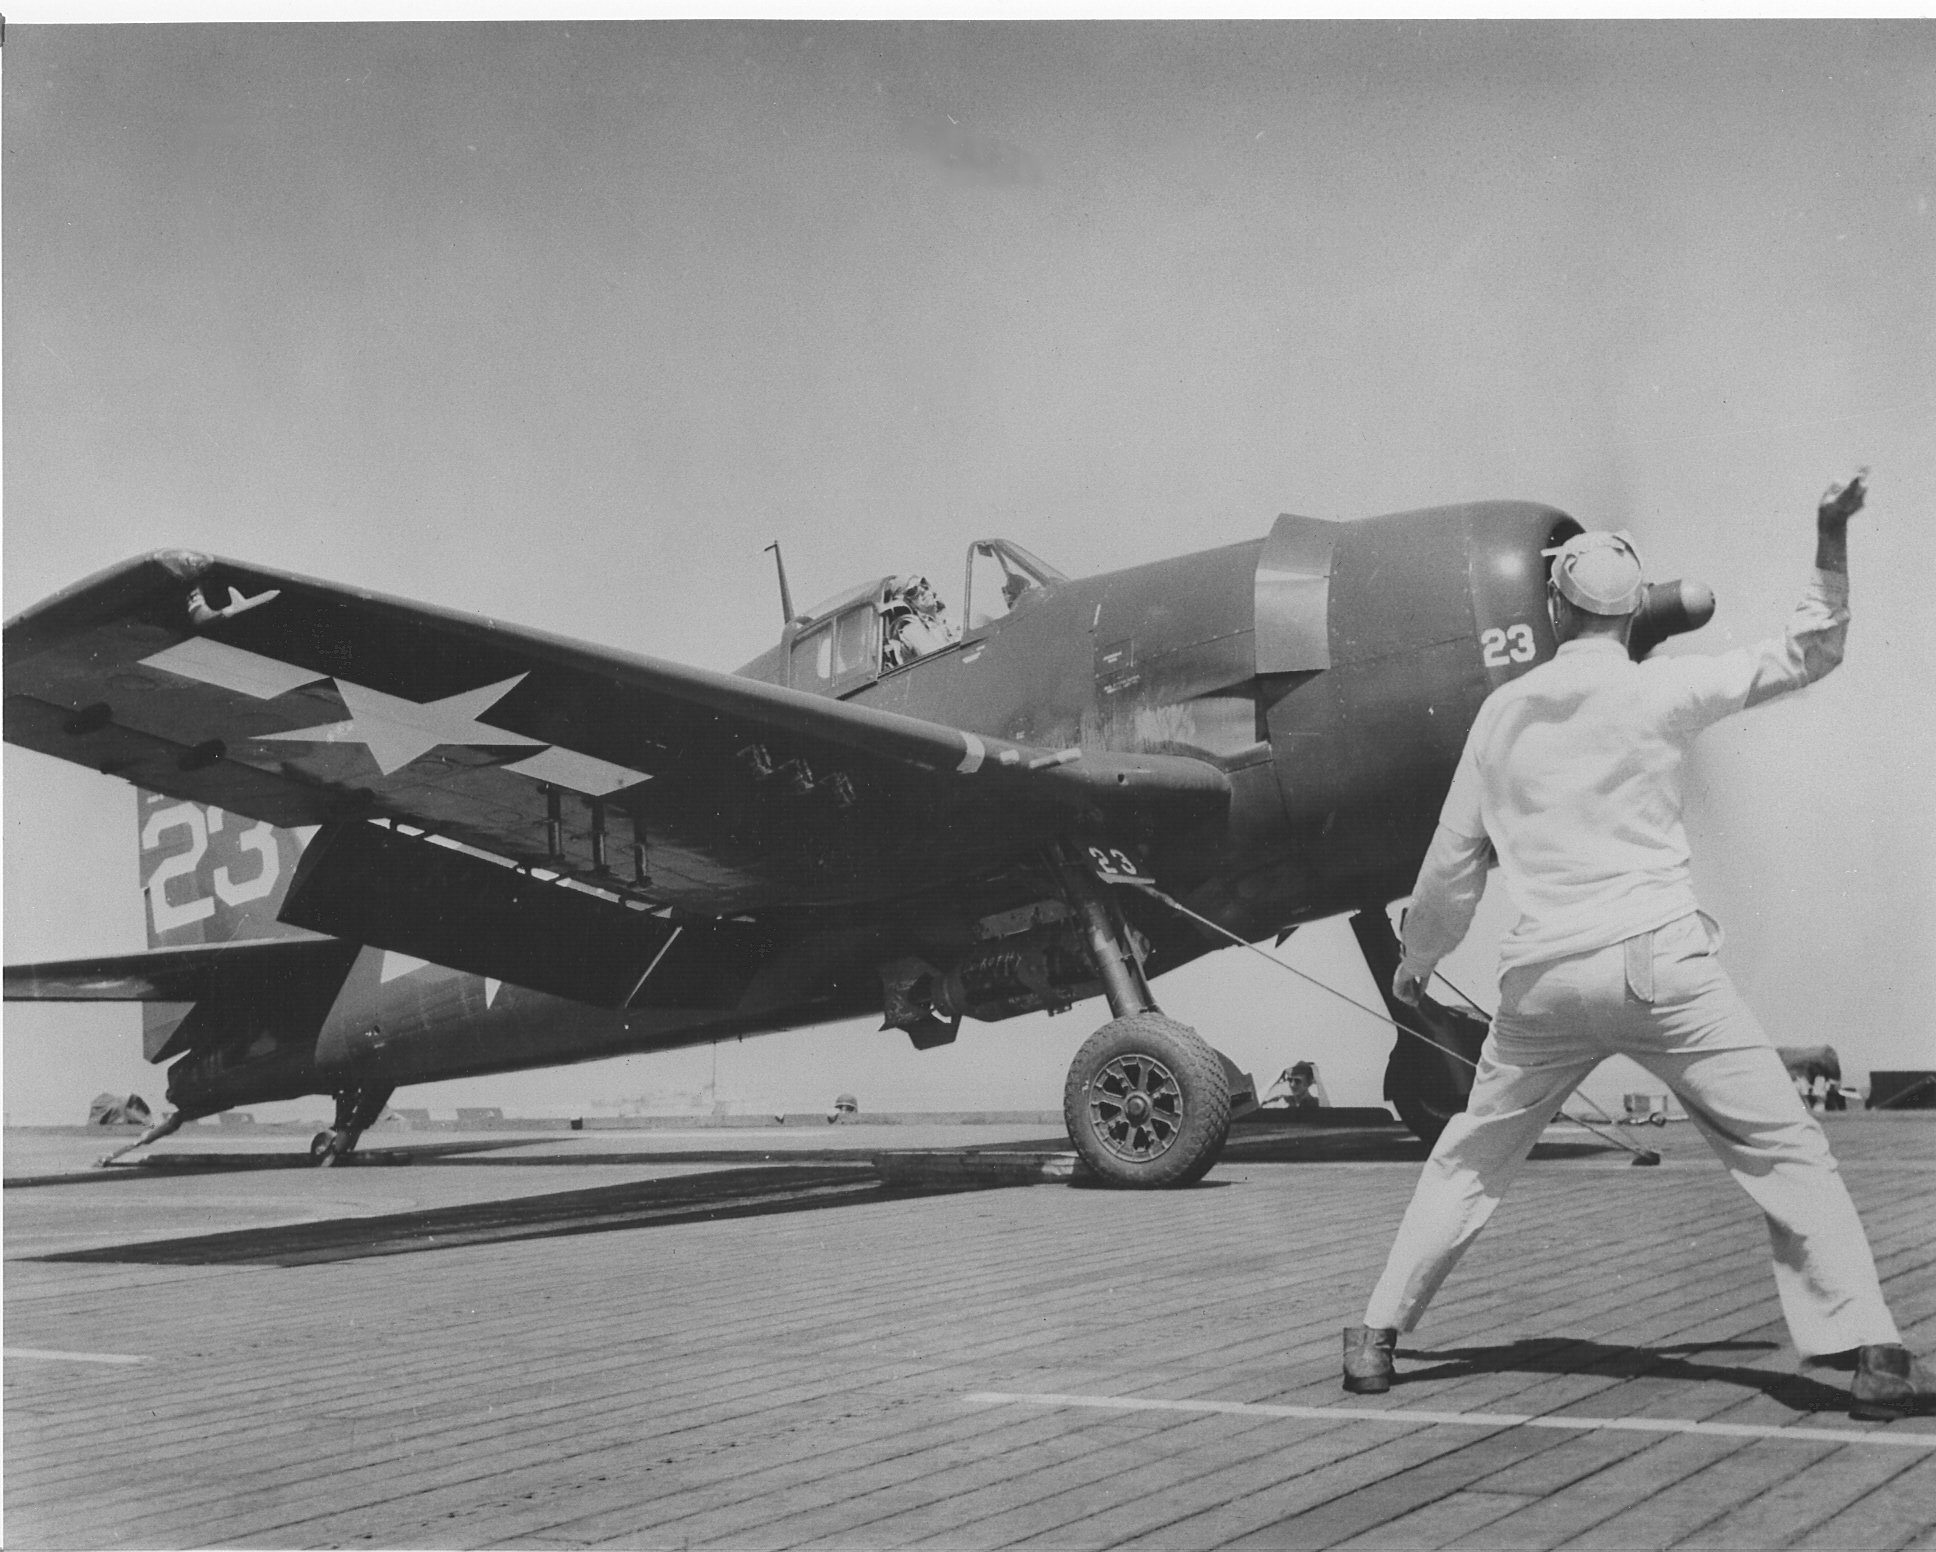 F6F-5 Hellcat set for a catapult launch from Escort Carrier USS Kasaan Bay in support of Operation Anvil/Dragoon, the invasion of southern France, Aug 1944